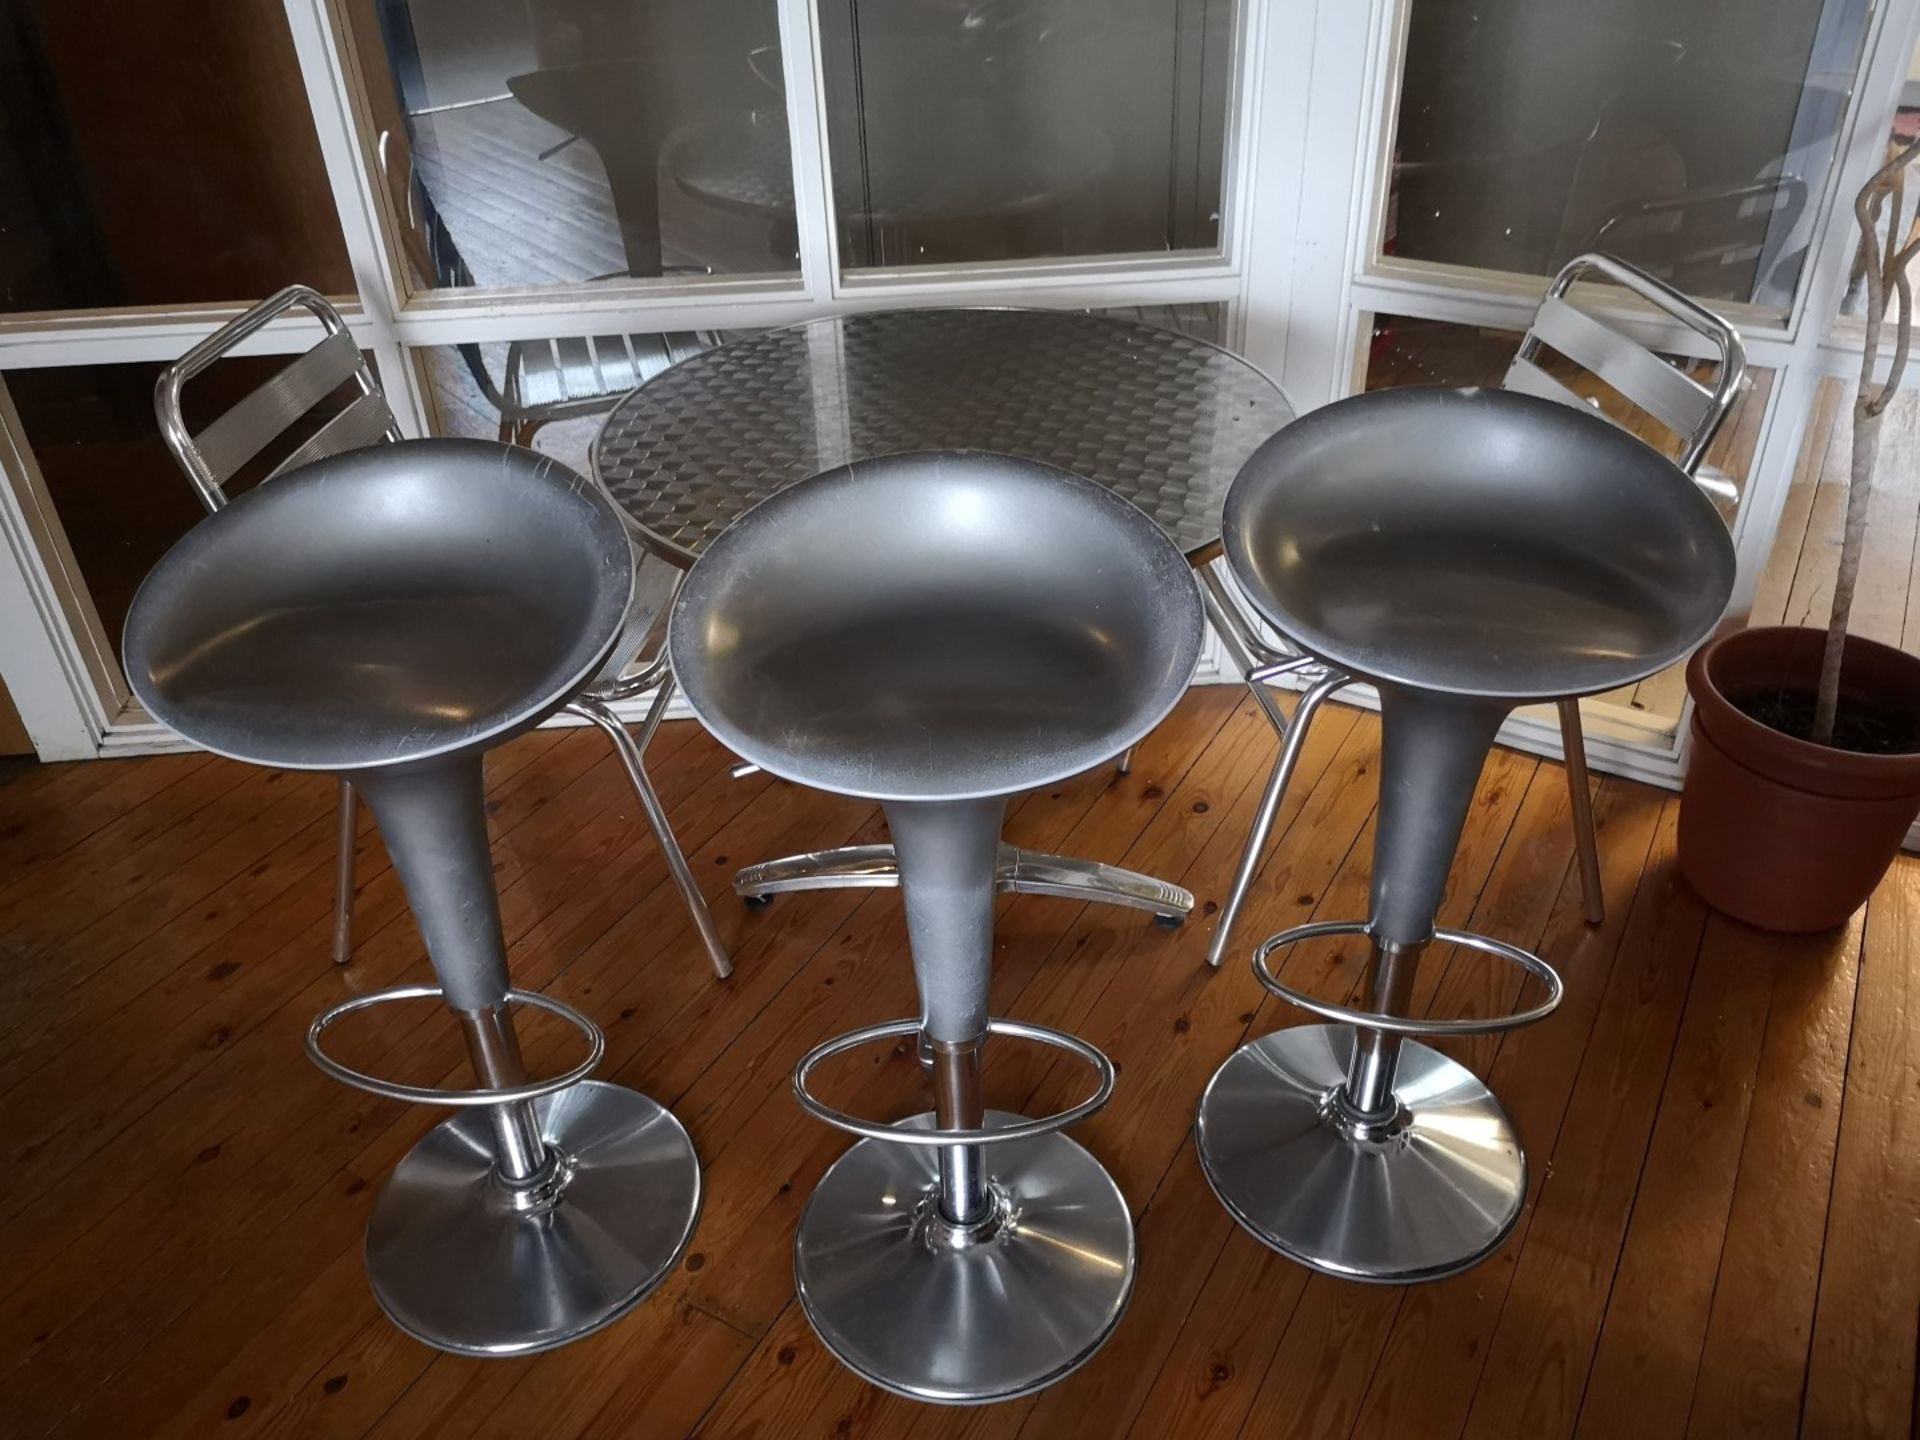 Aluminium Round Canteen Table with (2) Matching Chairs & (3) Silver Bar Stools - Image 2 of 2